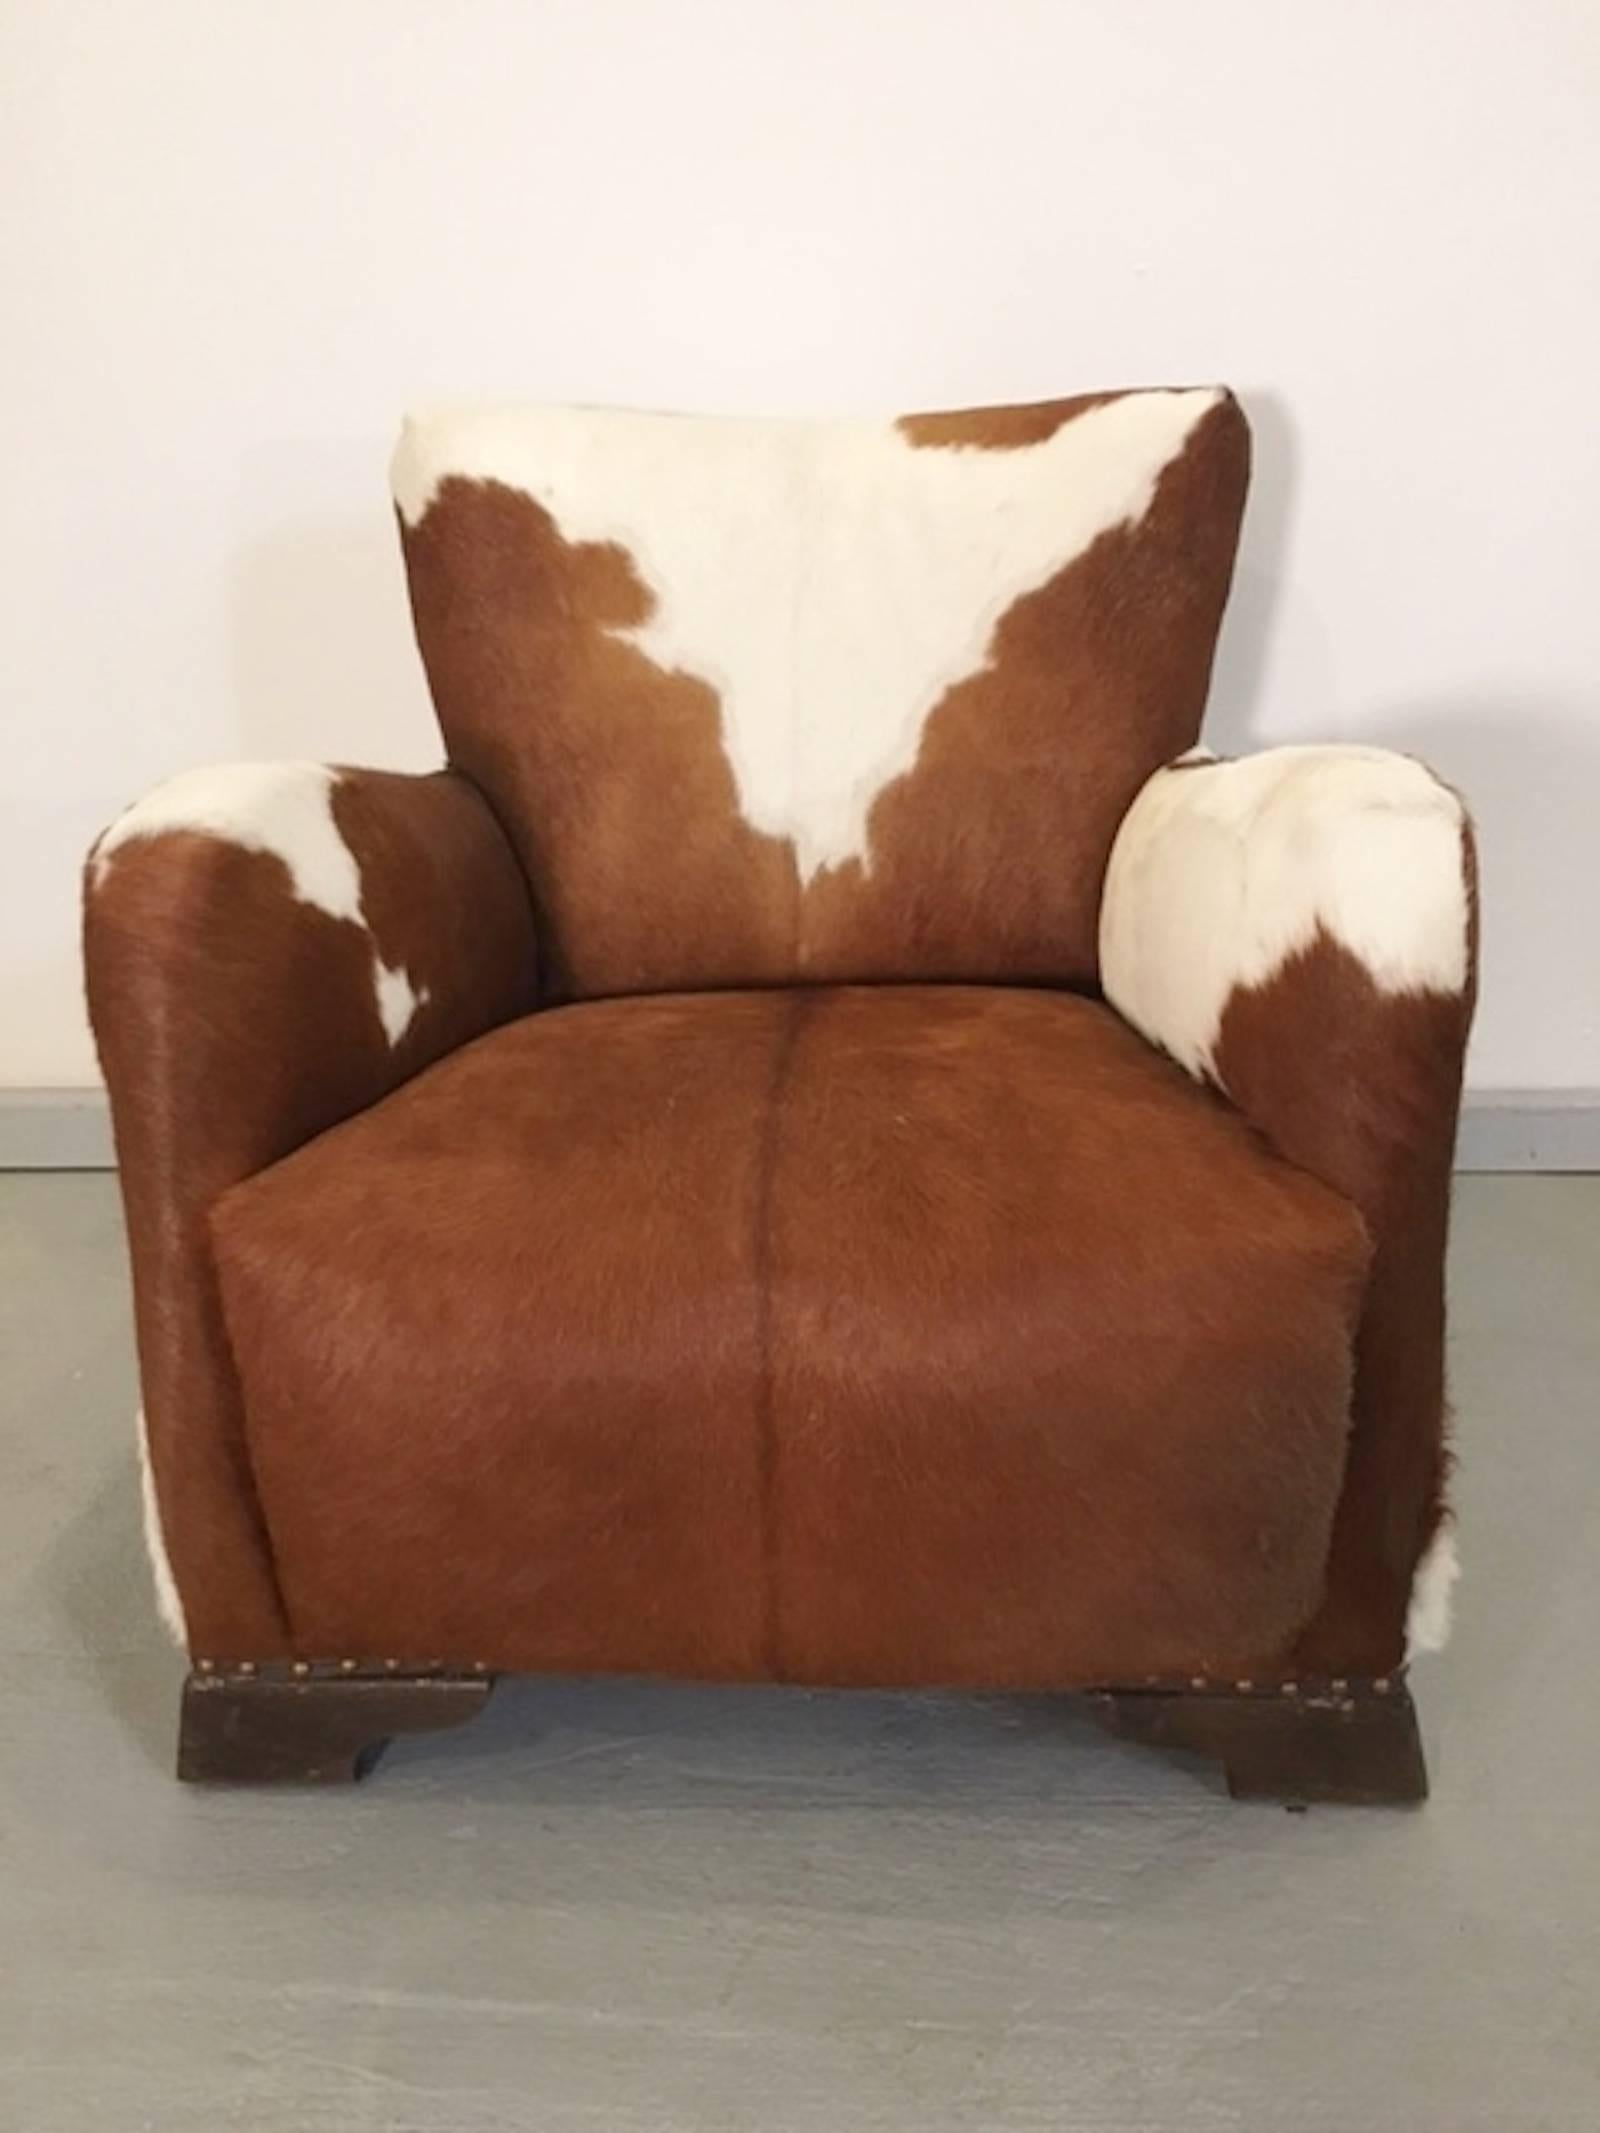 Handsome pair of vintage lounge chairs covered in superb brown and white cowhide. Wood feet with hammered nail trim.

(Please confirm item location with dealer).
             